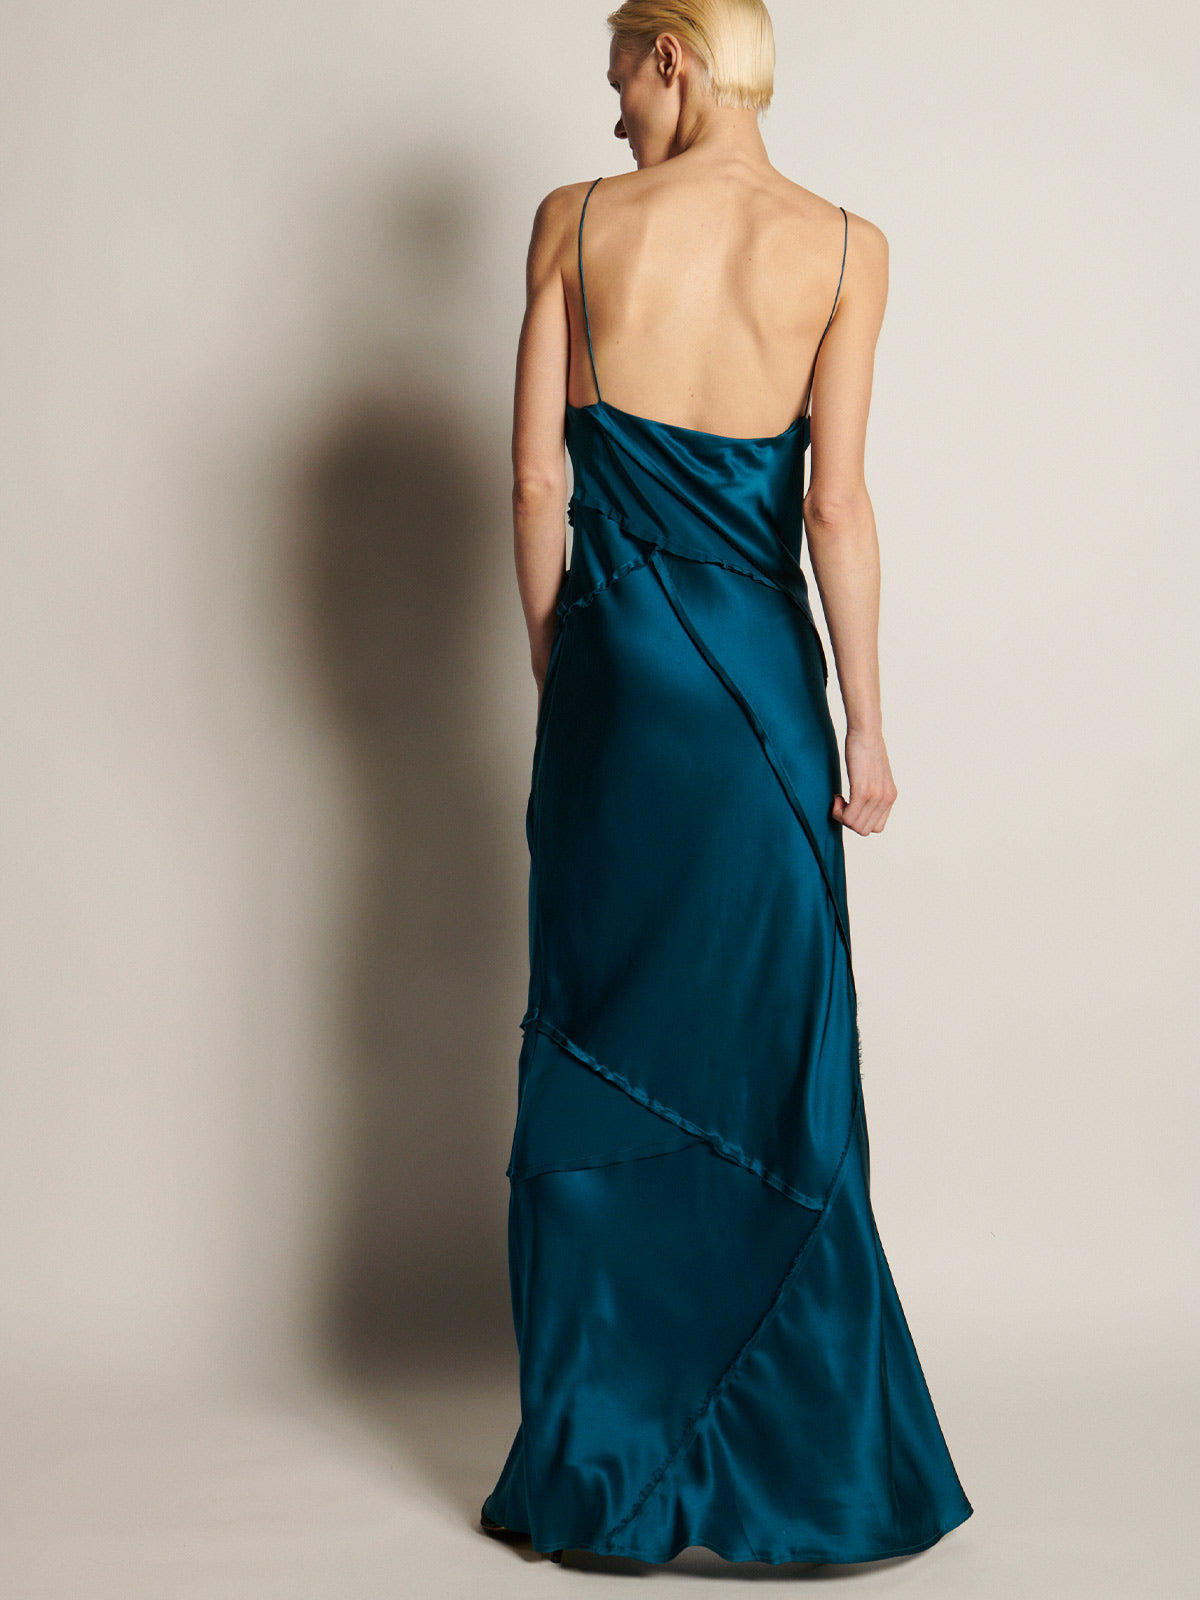 Elongated Recycled Dress With Slit | Teal Elongated Recycled Dress With Slit | Teal